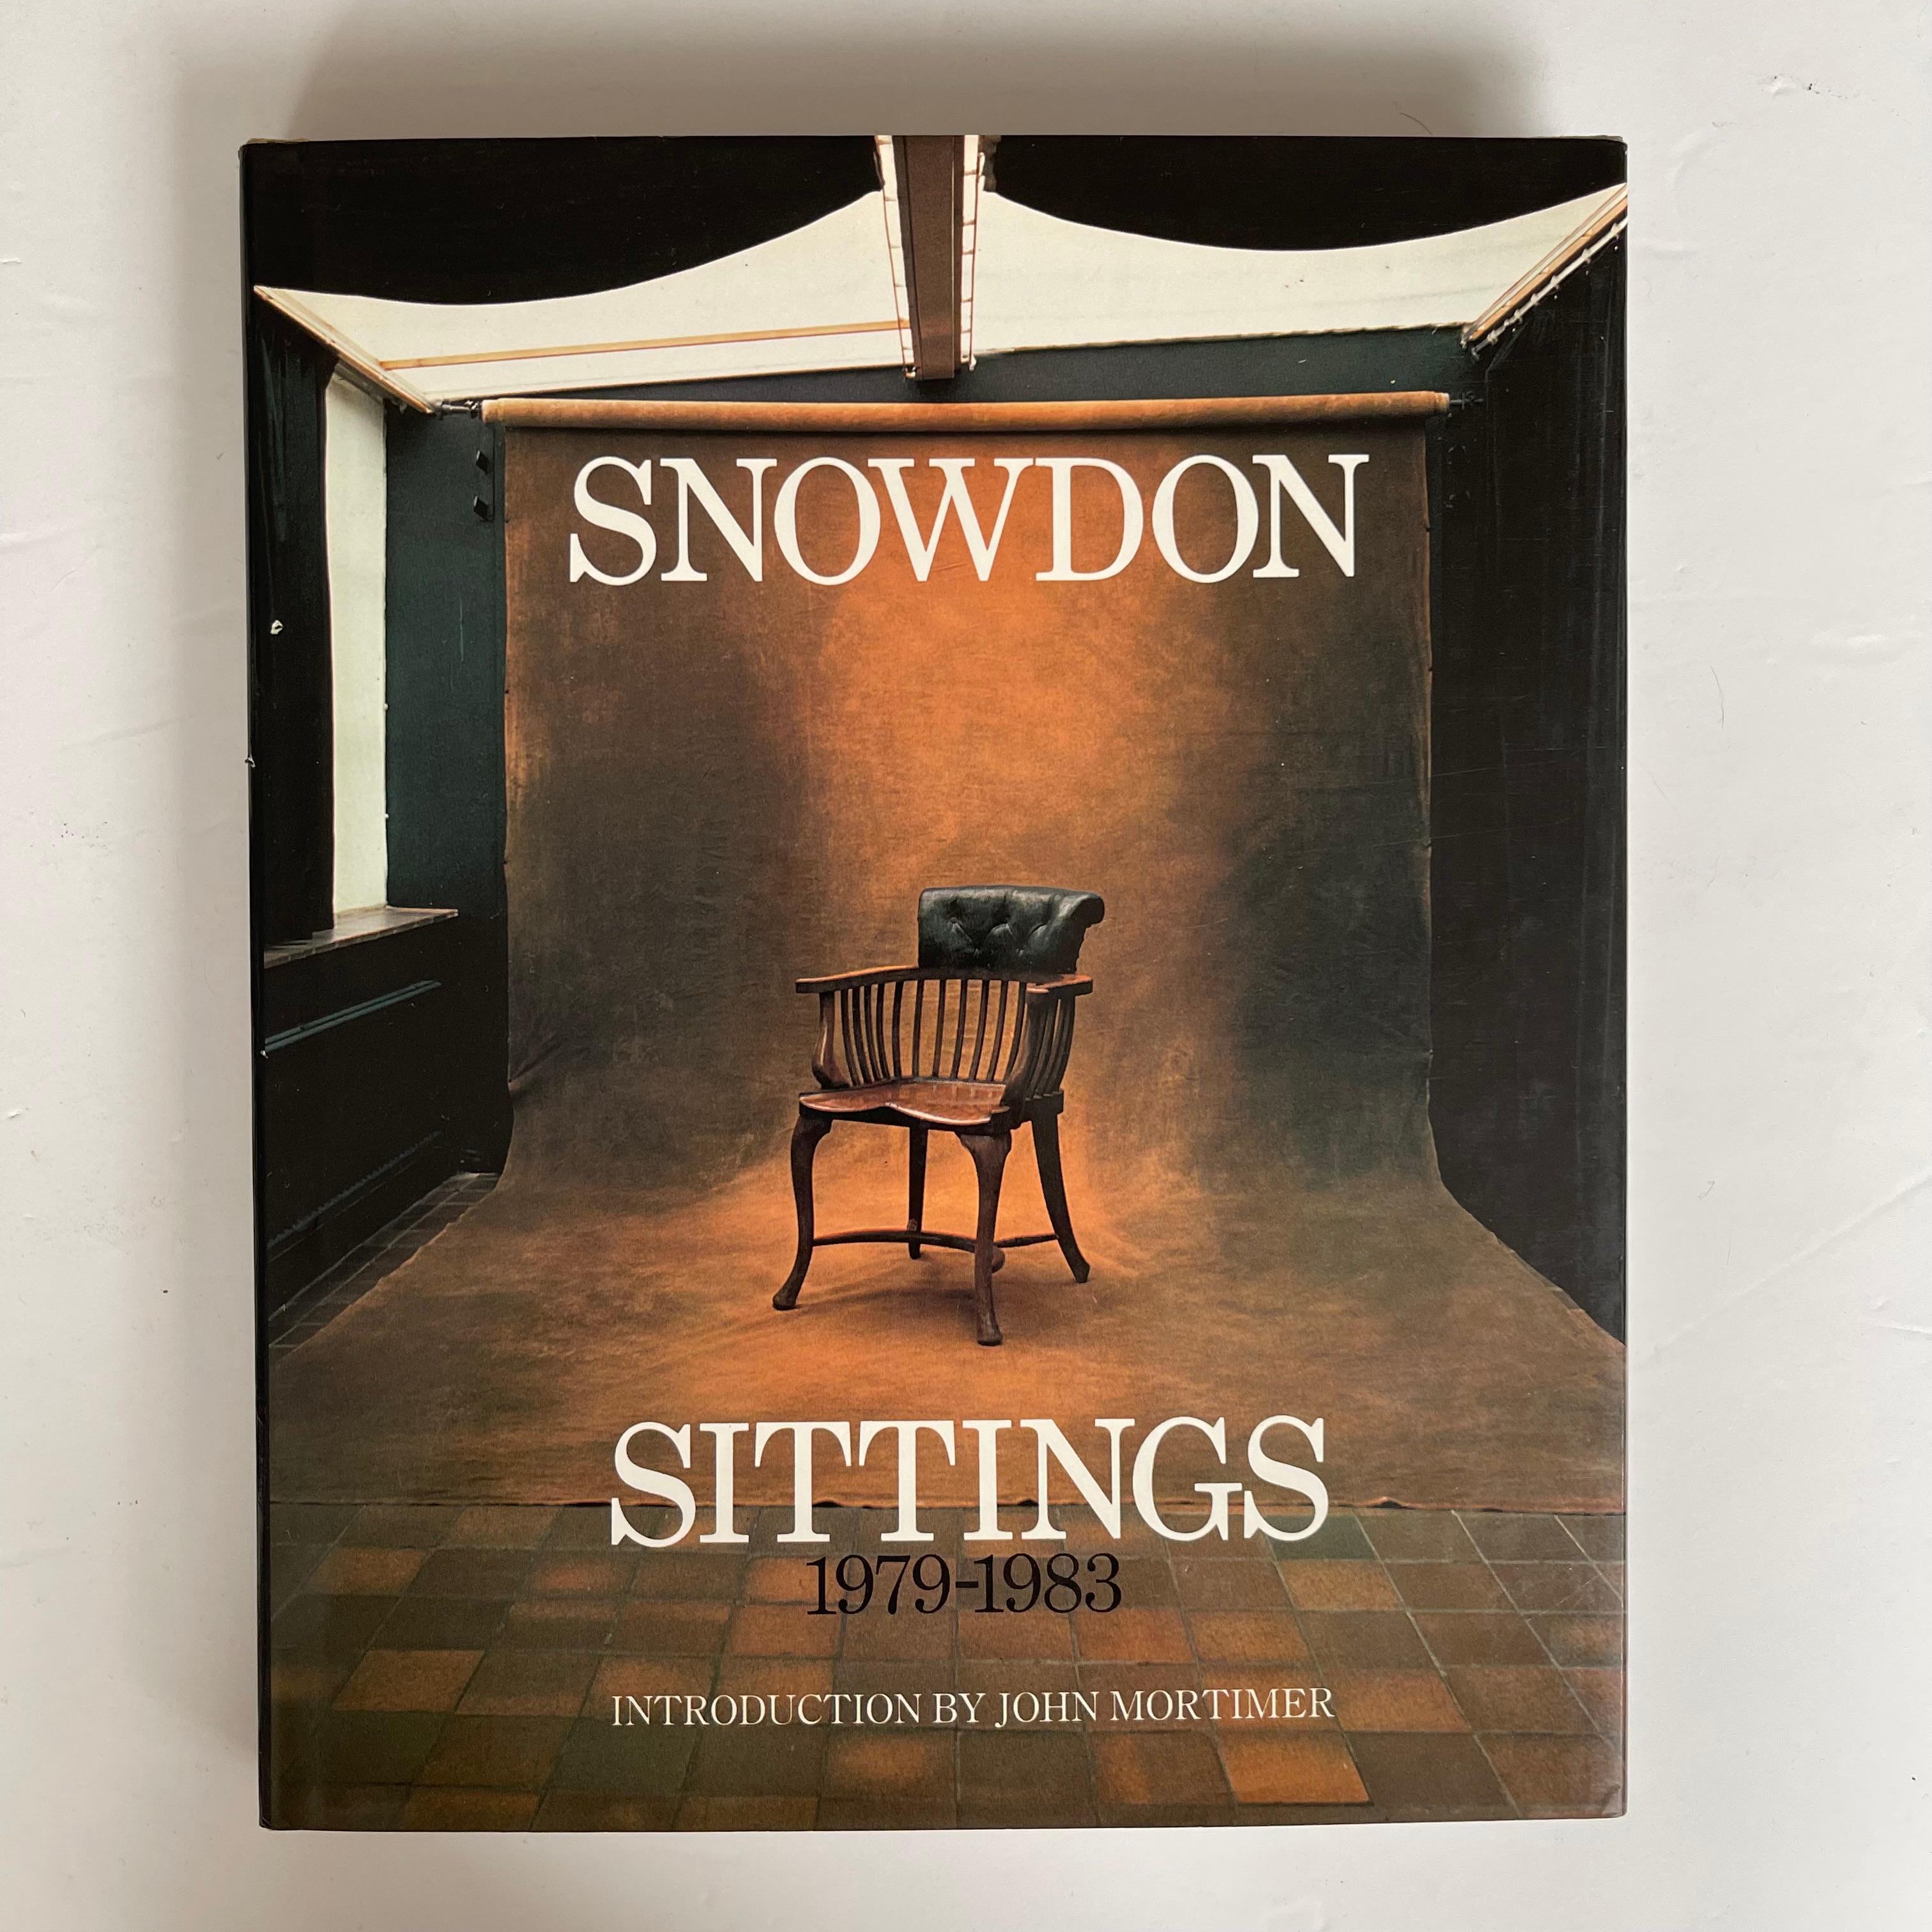 Published by Weidenfield and Nicholson London 1st Edition 1983

Photographs and commentary by Snowdon (Antony Armstrong-Jones); introduction by John Mortimer. 34 colour photographs and 81 duotones; 8.5 x 10.5 inches. Index of sitters; portraits of